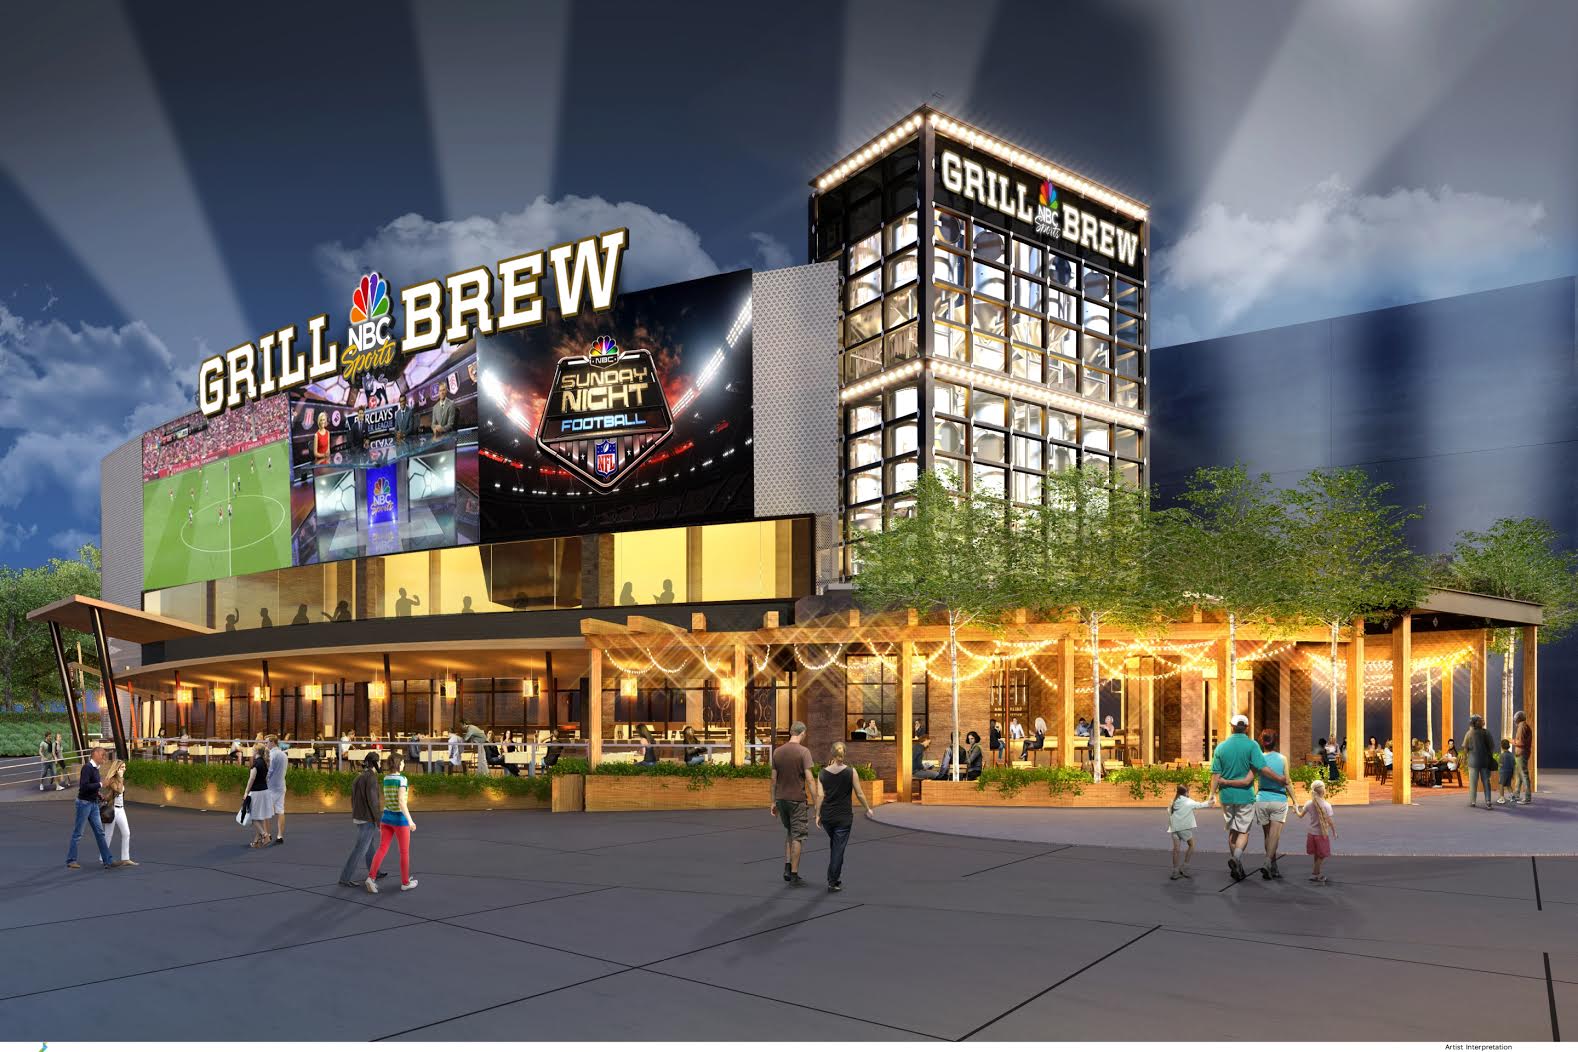 The world’s first-ever NBC Sports Grill & Brew is coming to Universal CityWalk – bringing an entirely new level of sports-dining experience.  Opening this fall, the all-new restaurant is designed to reflect the excellence and excitement of NBC Sports’ award-winning coverage. The new restaurant will combine a sophisticated and stylish setting with wall-to-wall sports coverage, a specially created menu that includes all your favorites and more – and an amazing beer selection. © 2015 Universal Orlando Resort. All rights reserved.